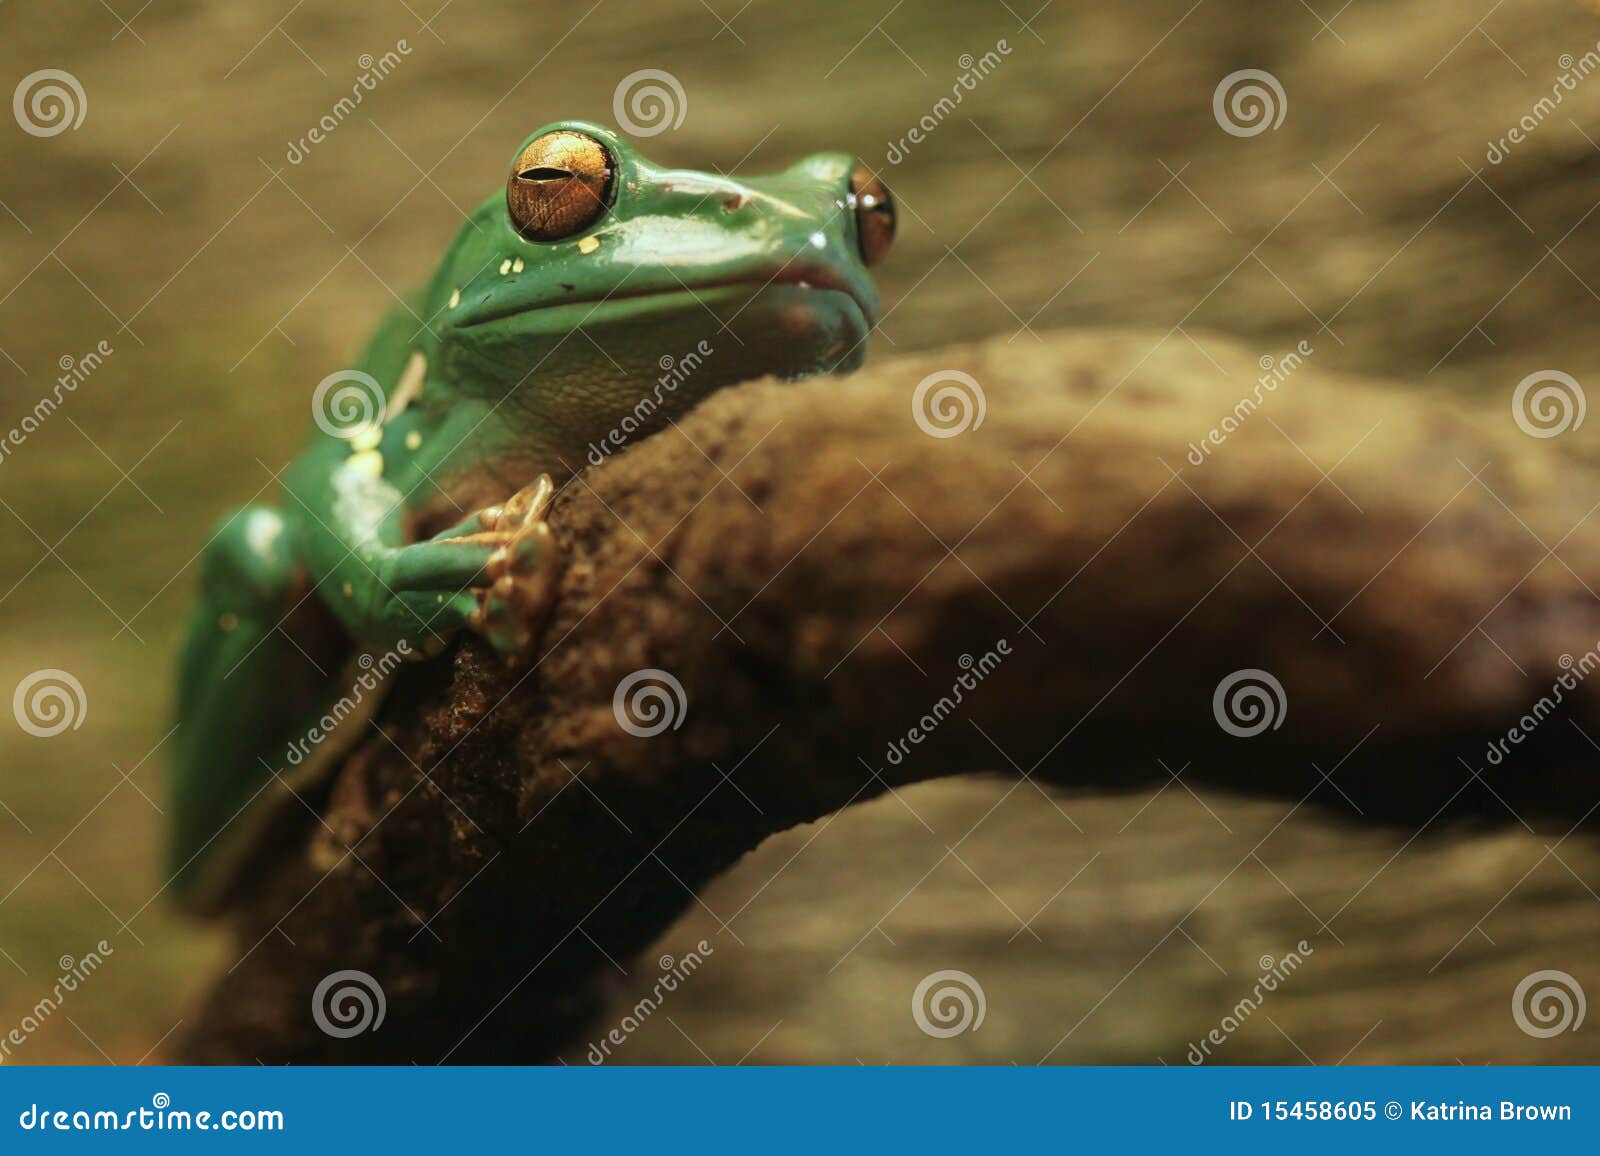 a chinese gliding frog with eyes closed